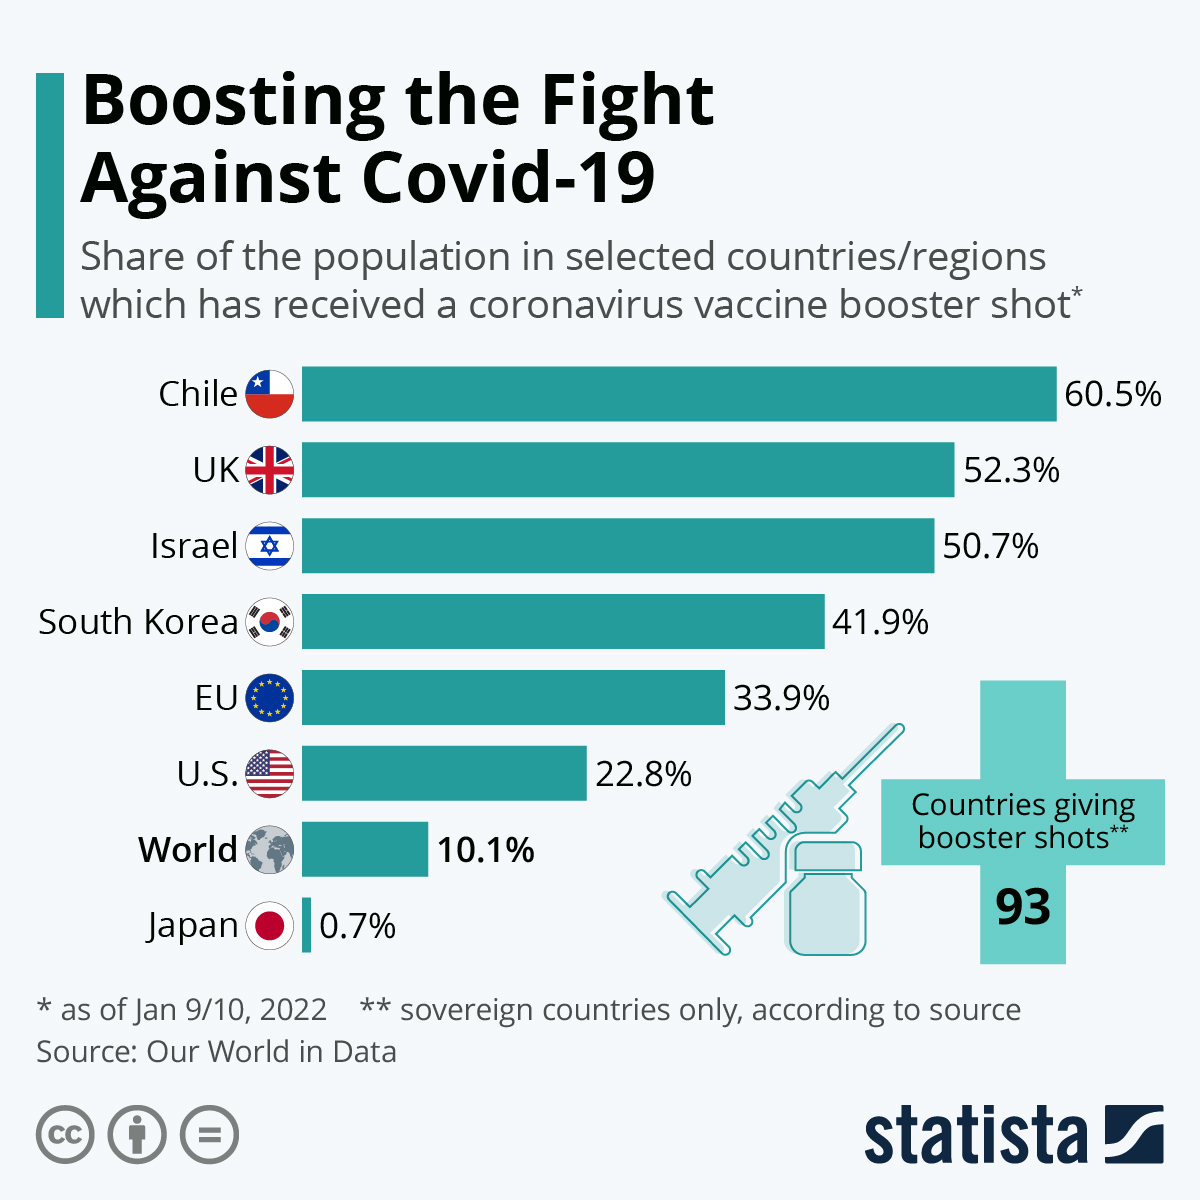 Boosting the Fight Against Covid-19